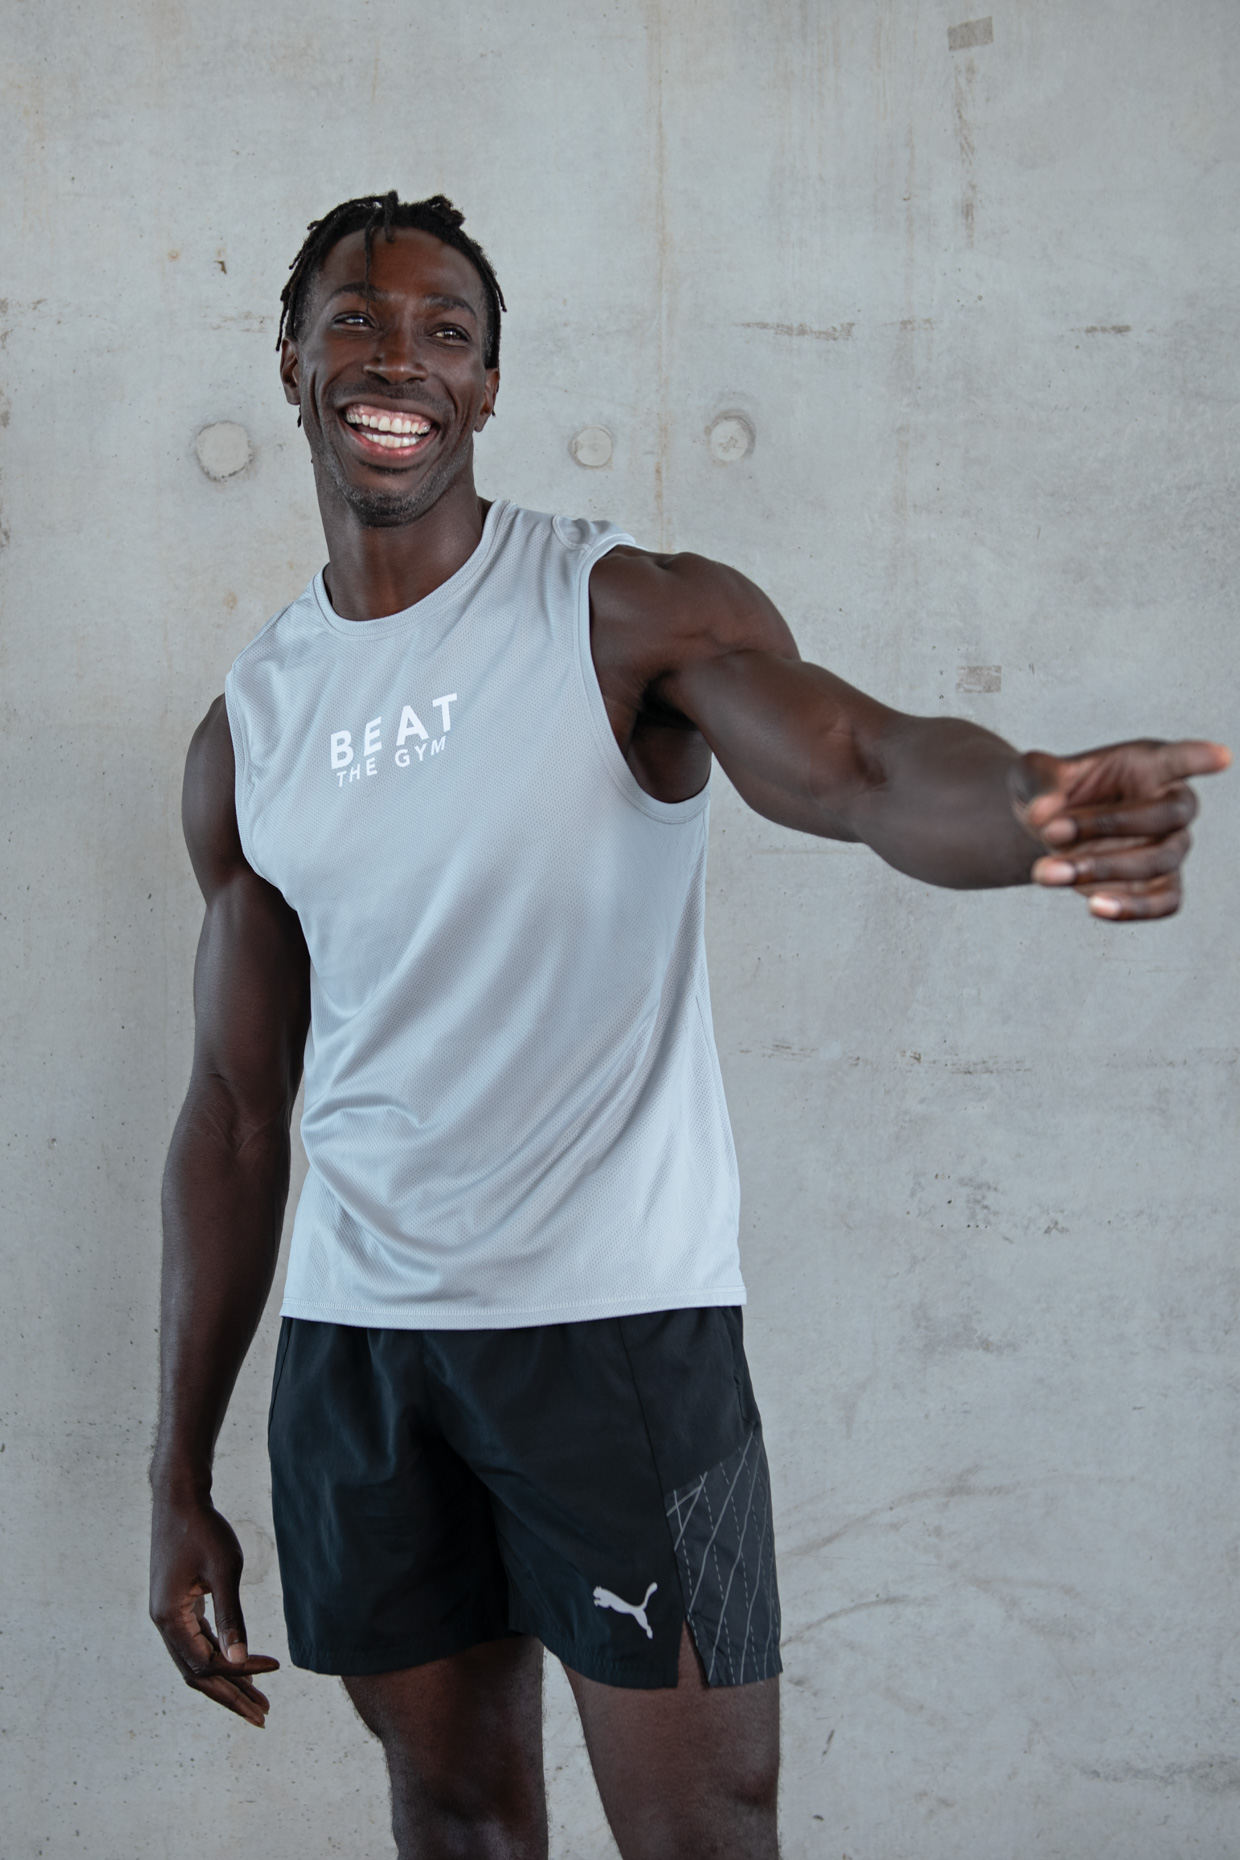 Beat The Gym - At Home Workouts - Athlete and Coach portraits and action shots -281-Edit